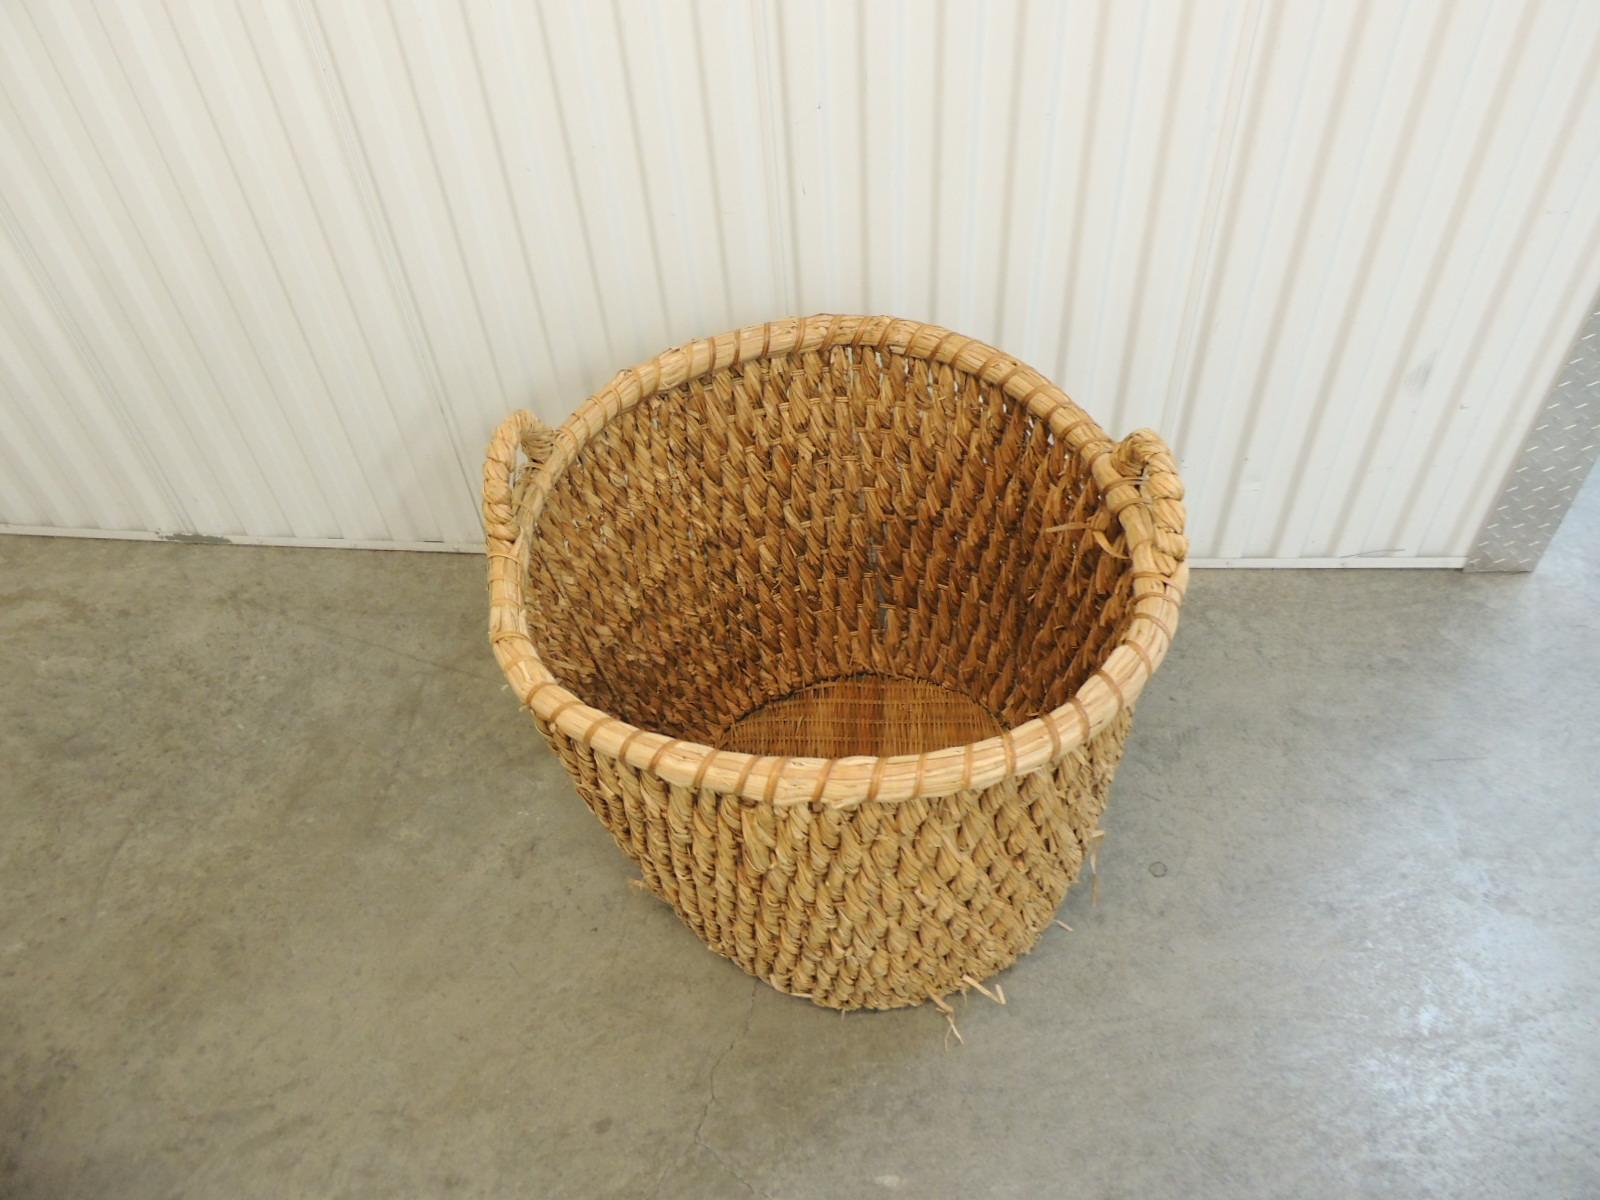 Large scale vintage water hyacinth logs basket with handles
Woven wicker bottom
Natural fiber is wrapped around a metal structure to shape the basket
Handcrafted in South America, 1990's
Ideal as a planter in the garden
Size: 26